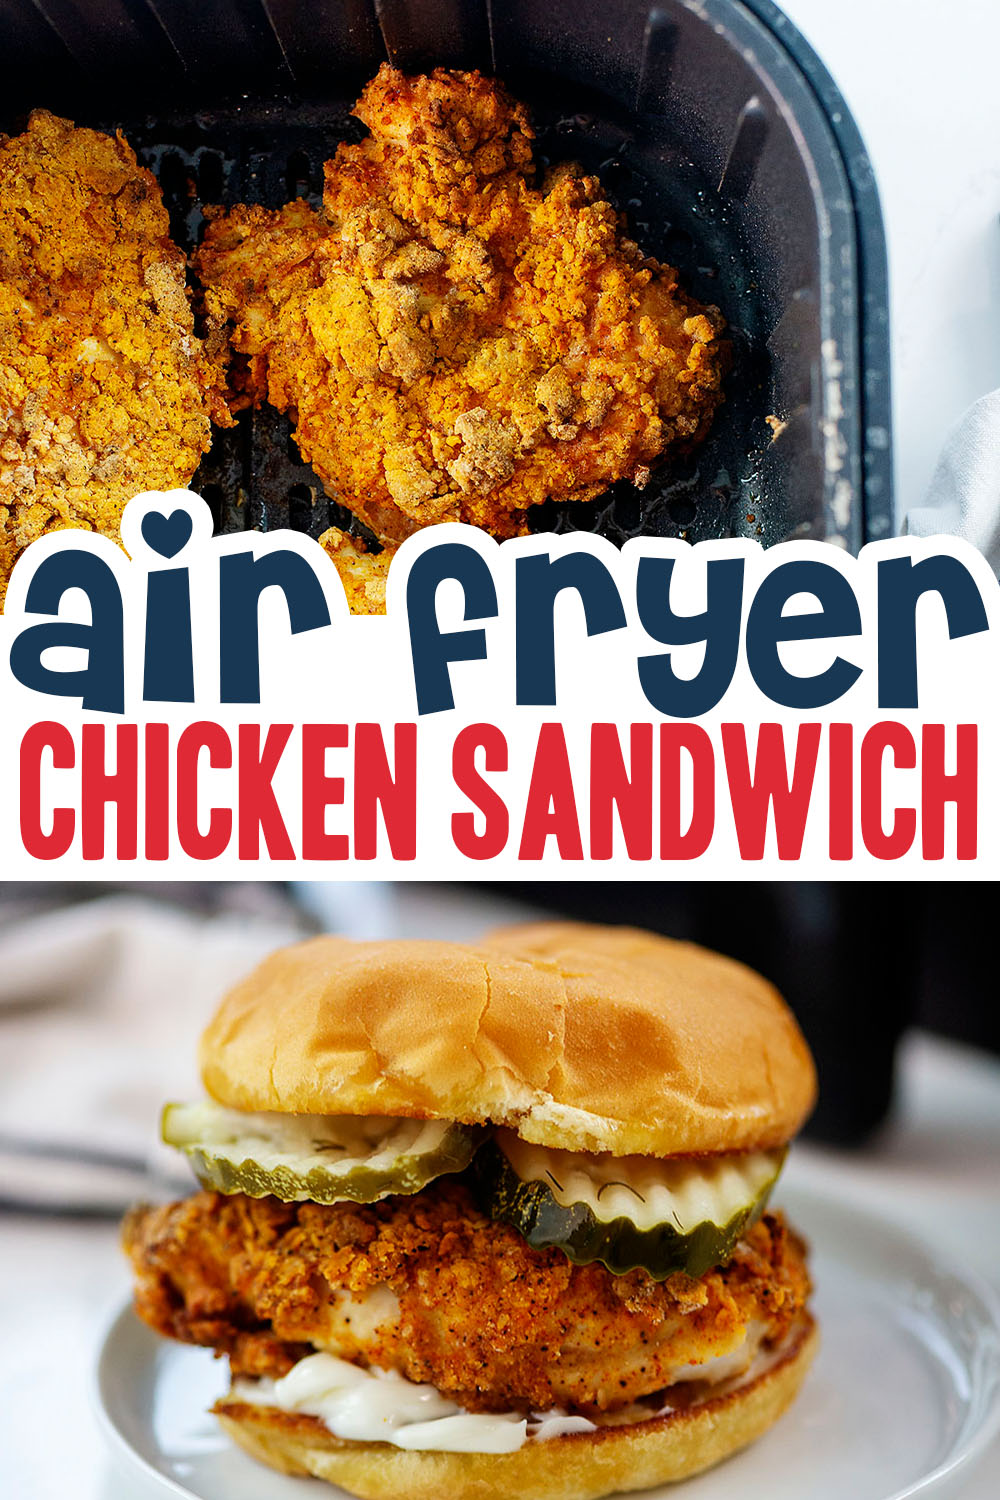 We have an easy recipe for the perfect chicken sandwich here!  The secret is to use your air fryer for easy clean up too!